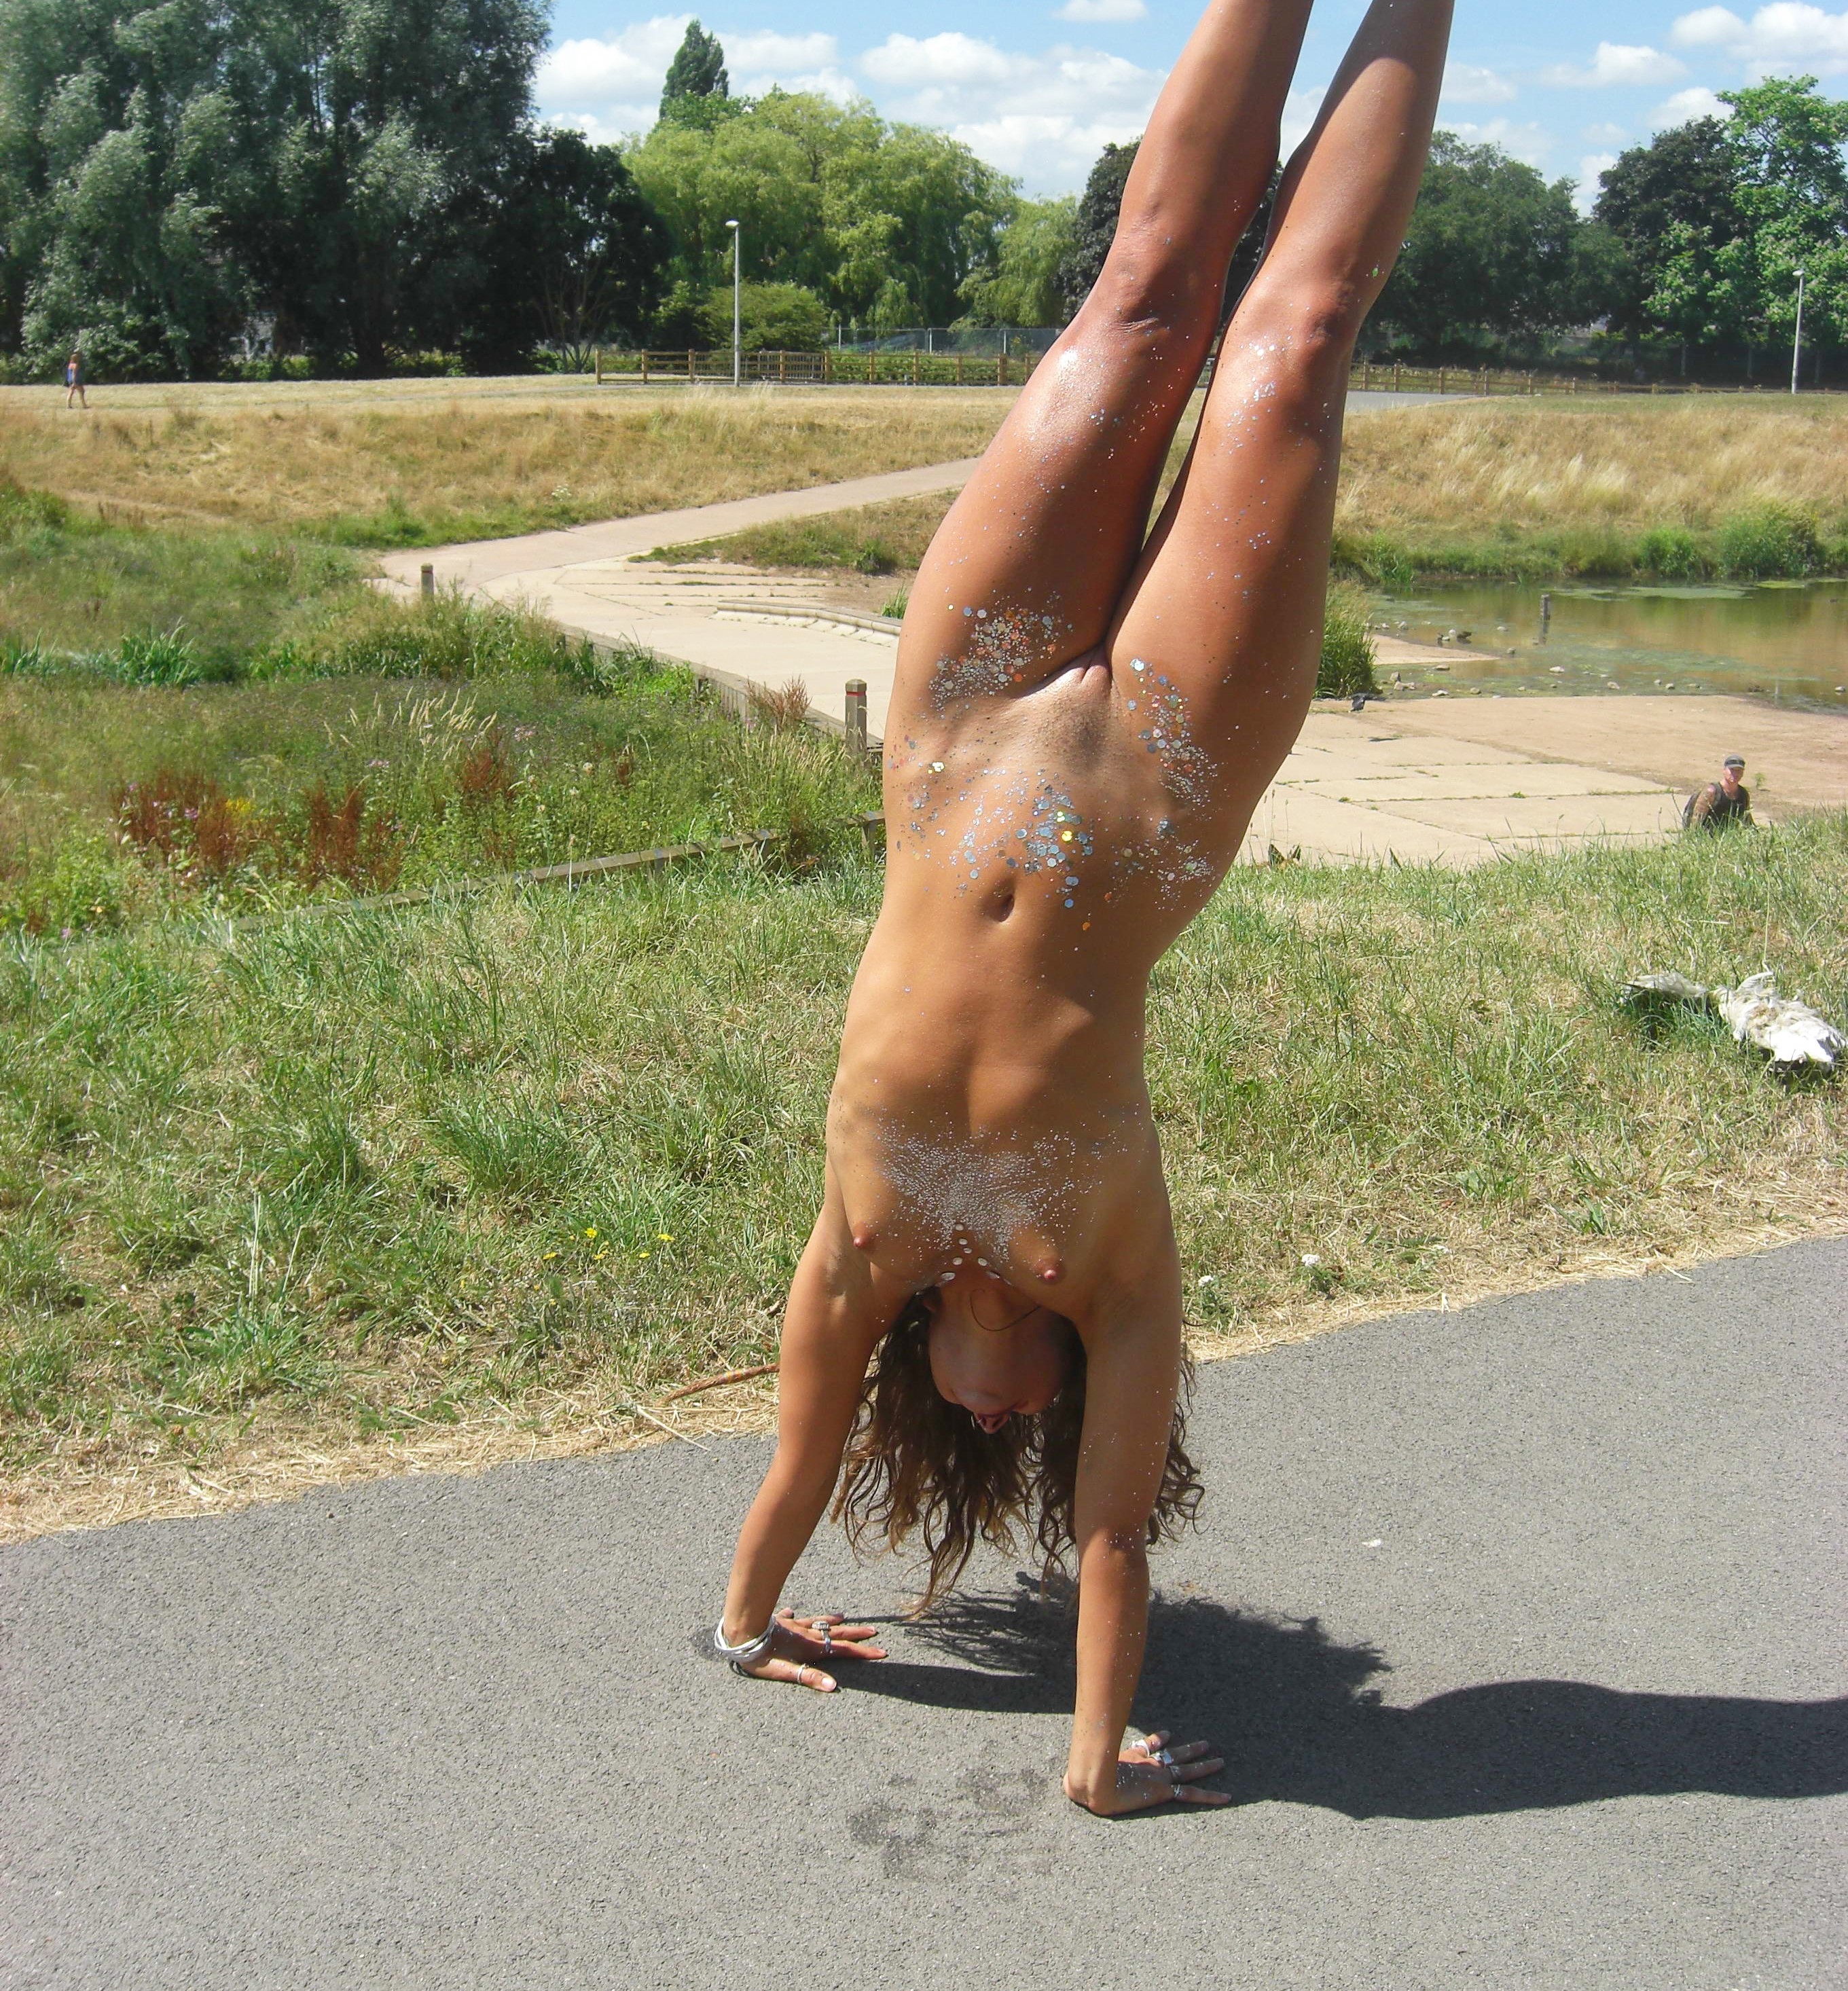 Girl accidently shows boobs doing handstand